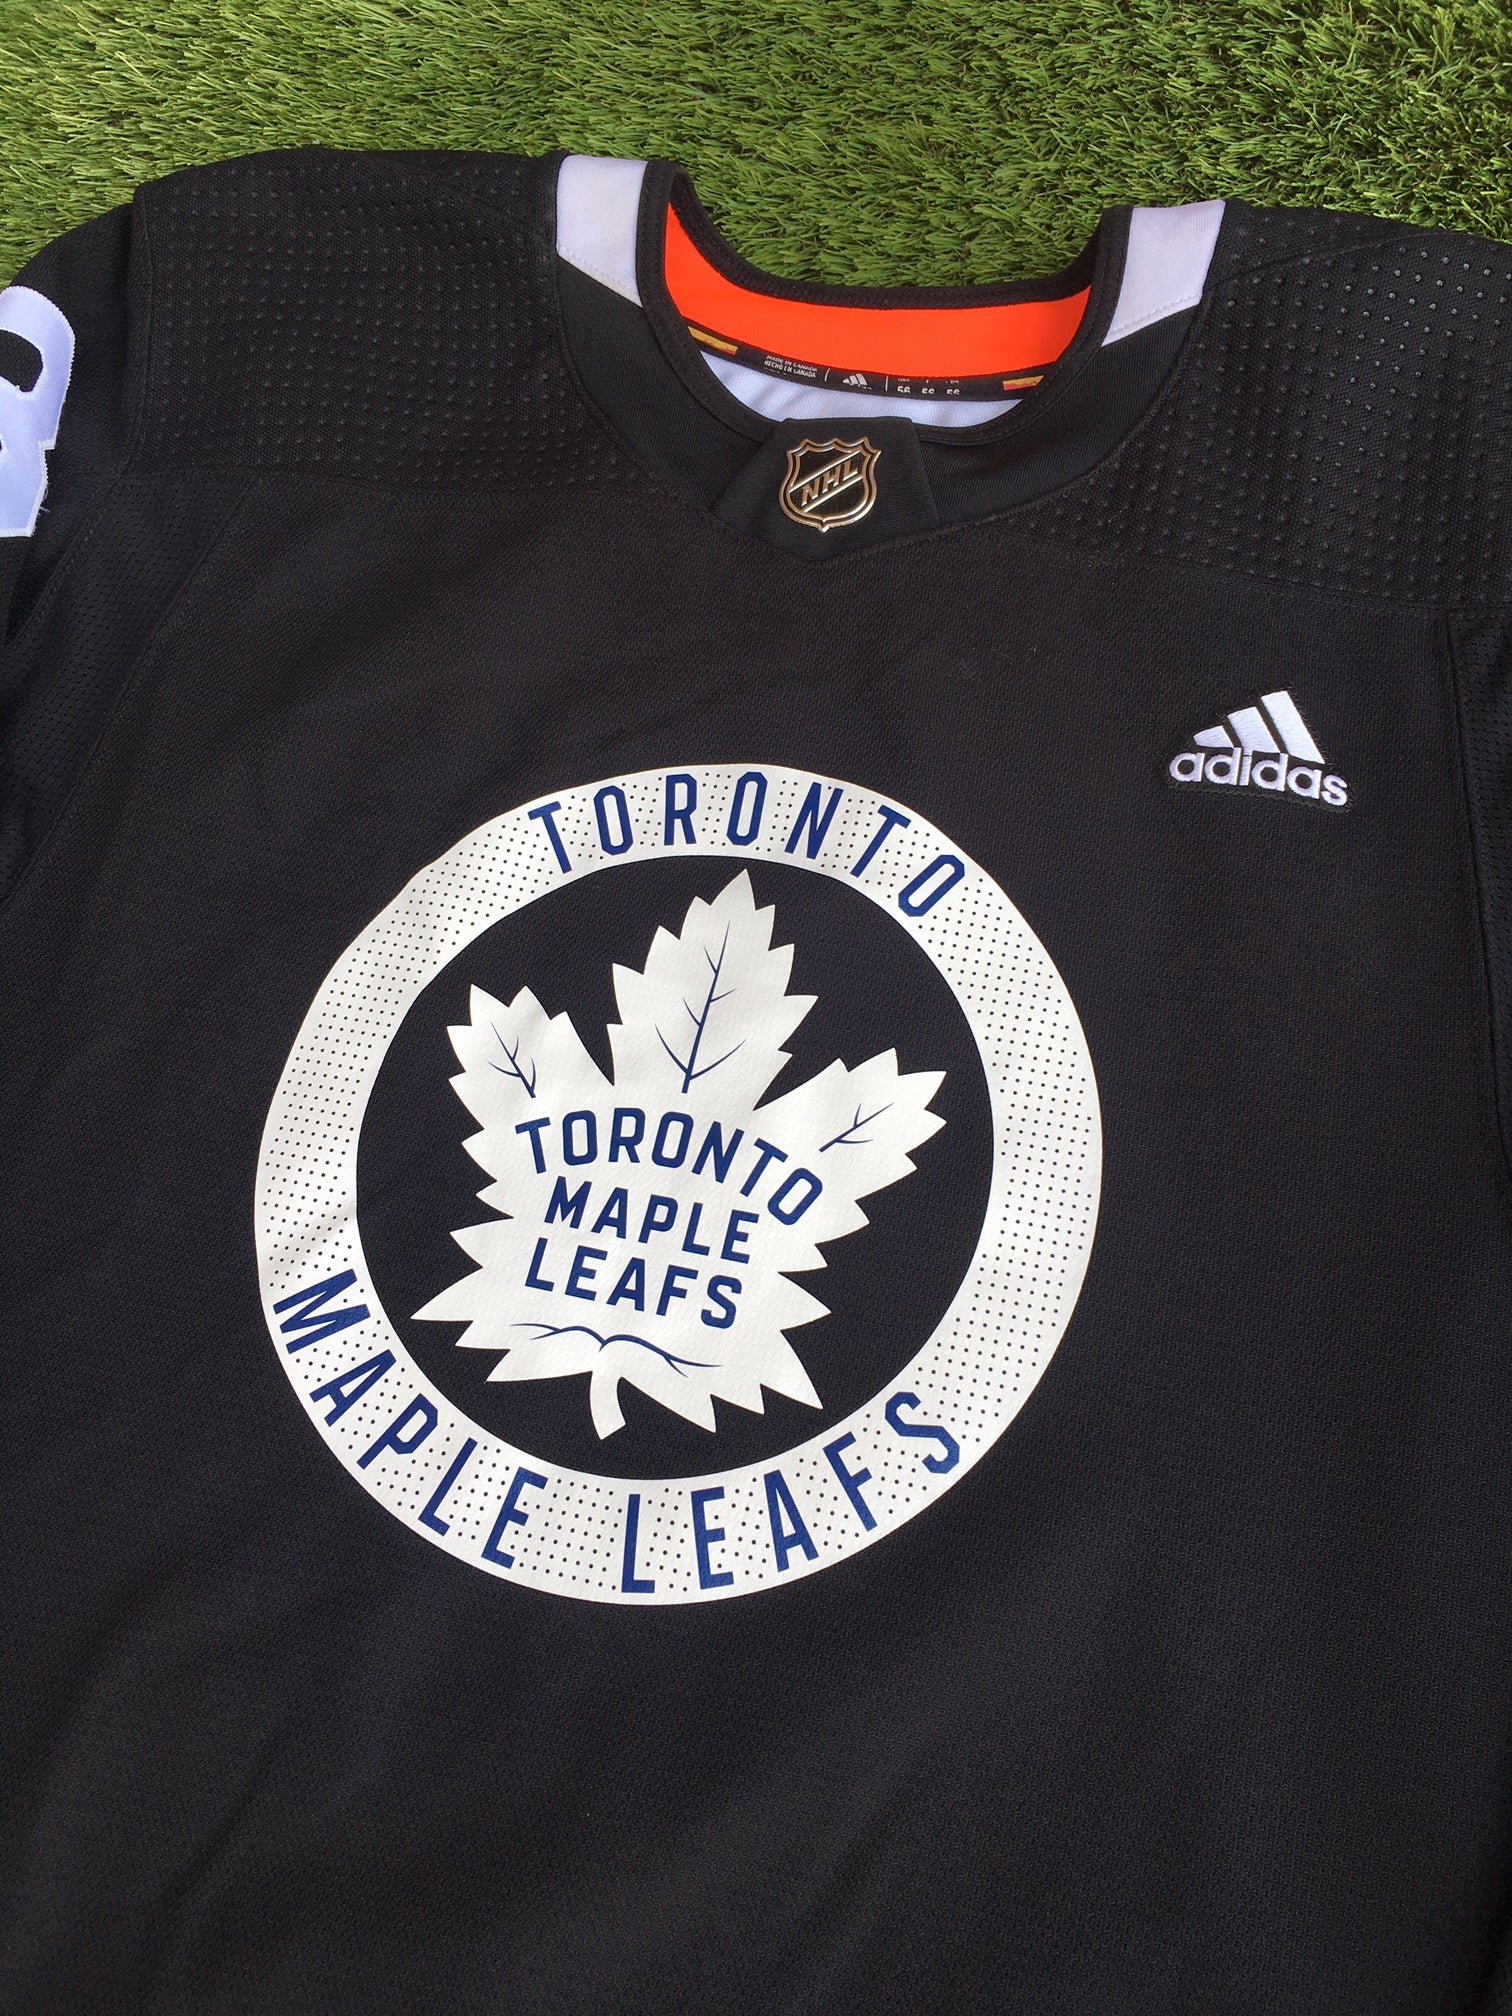 maple leafs practice jersey